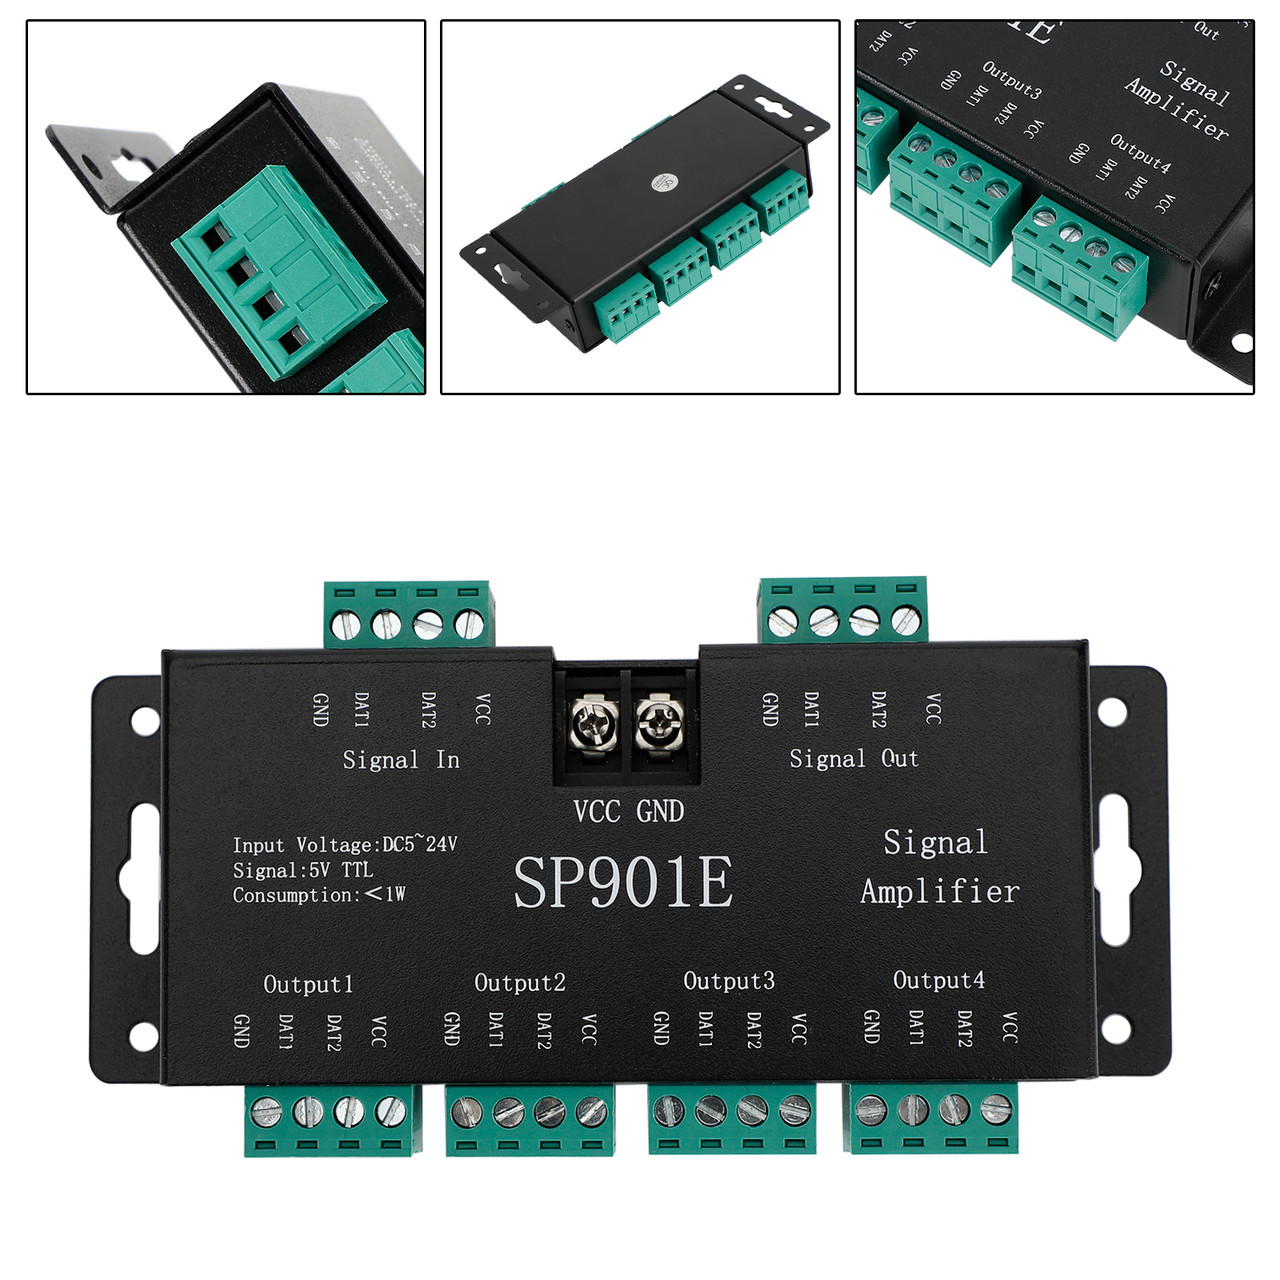 RGB Signal Amplifier Repeater Addressable Programmable For LED Strip SP901E